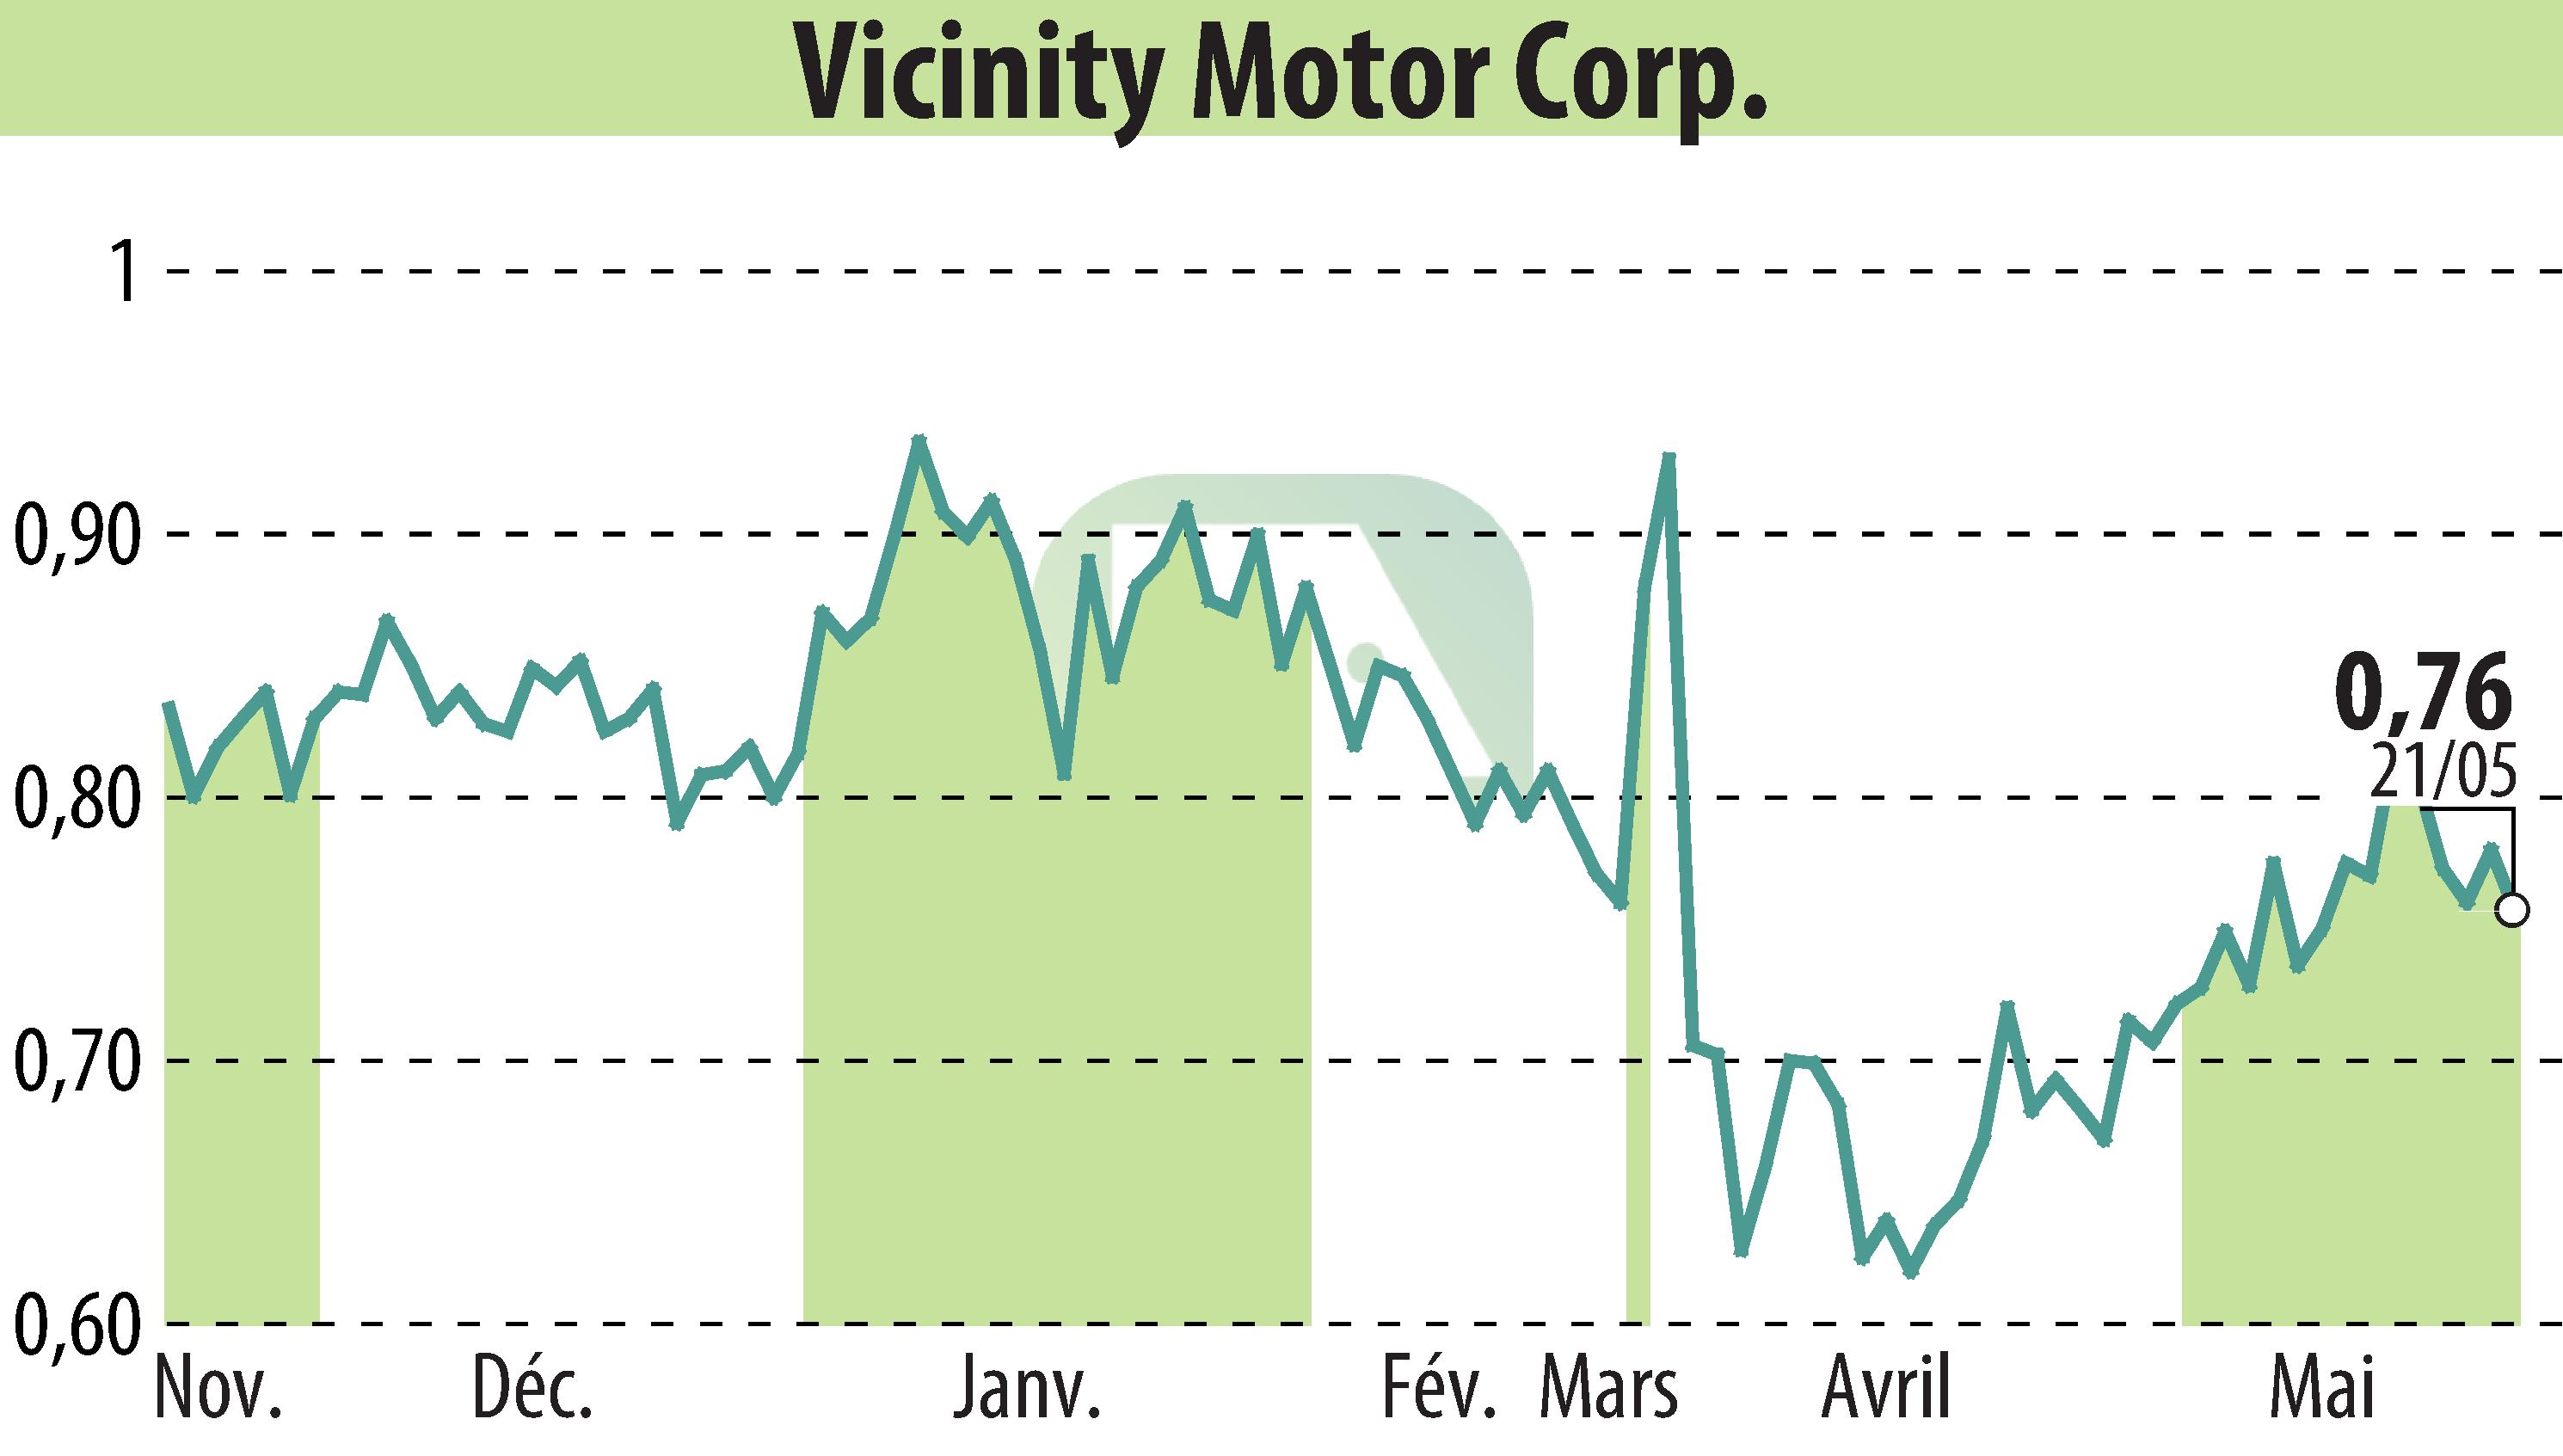 Stock price chart of Vicinity Motor Corp. (EBR:VEV) showing fluctuations.